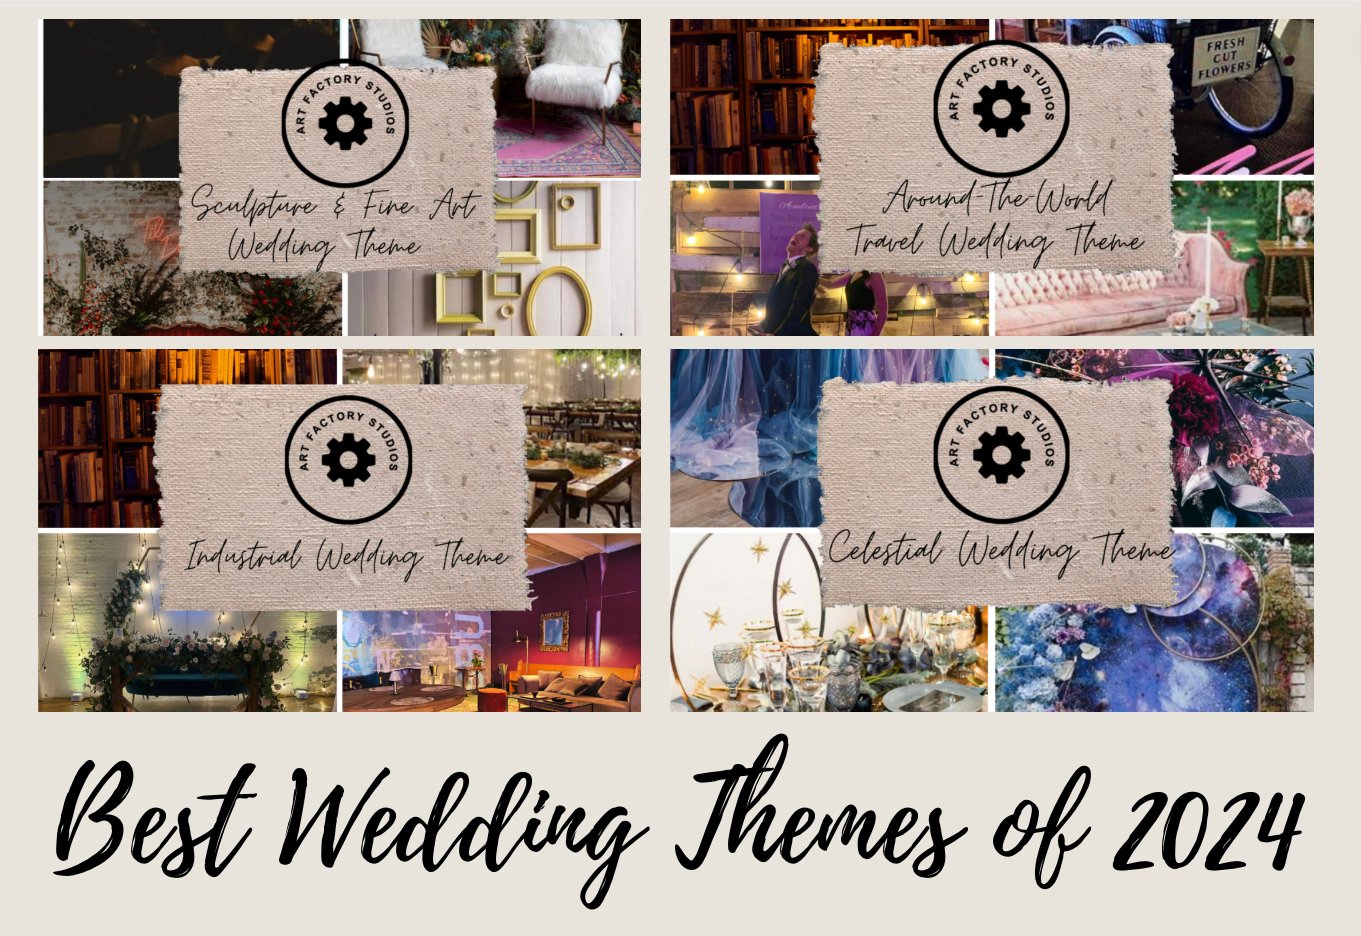 Unforgettable Wedding Themes to Inspire Your Big Day